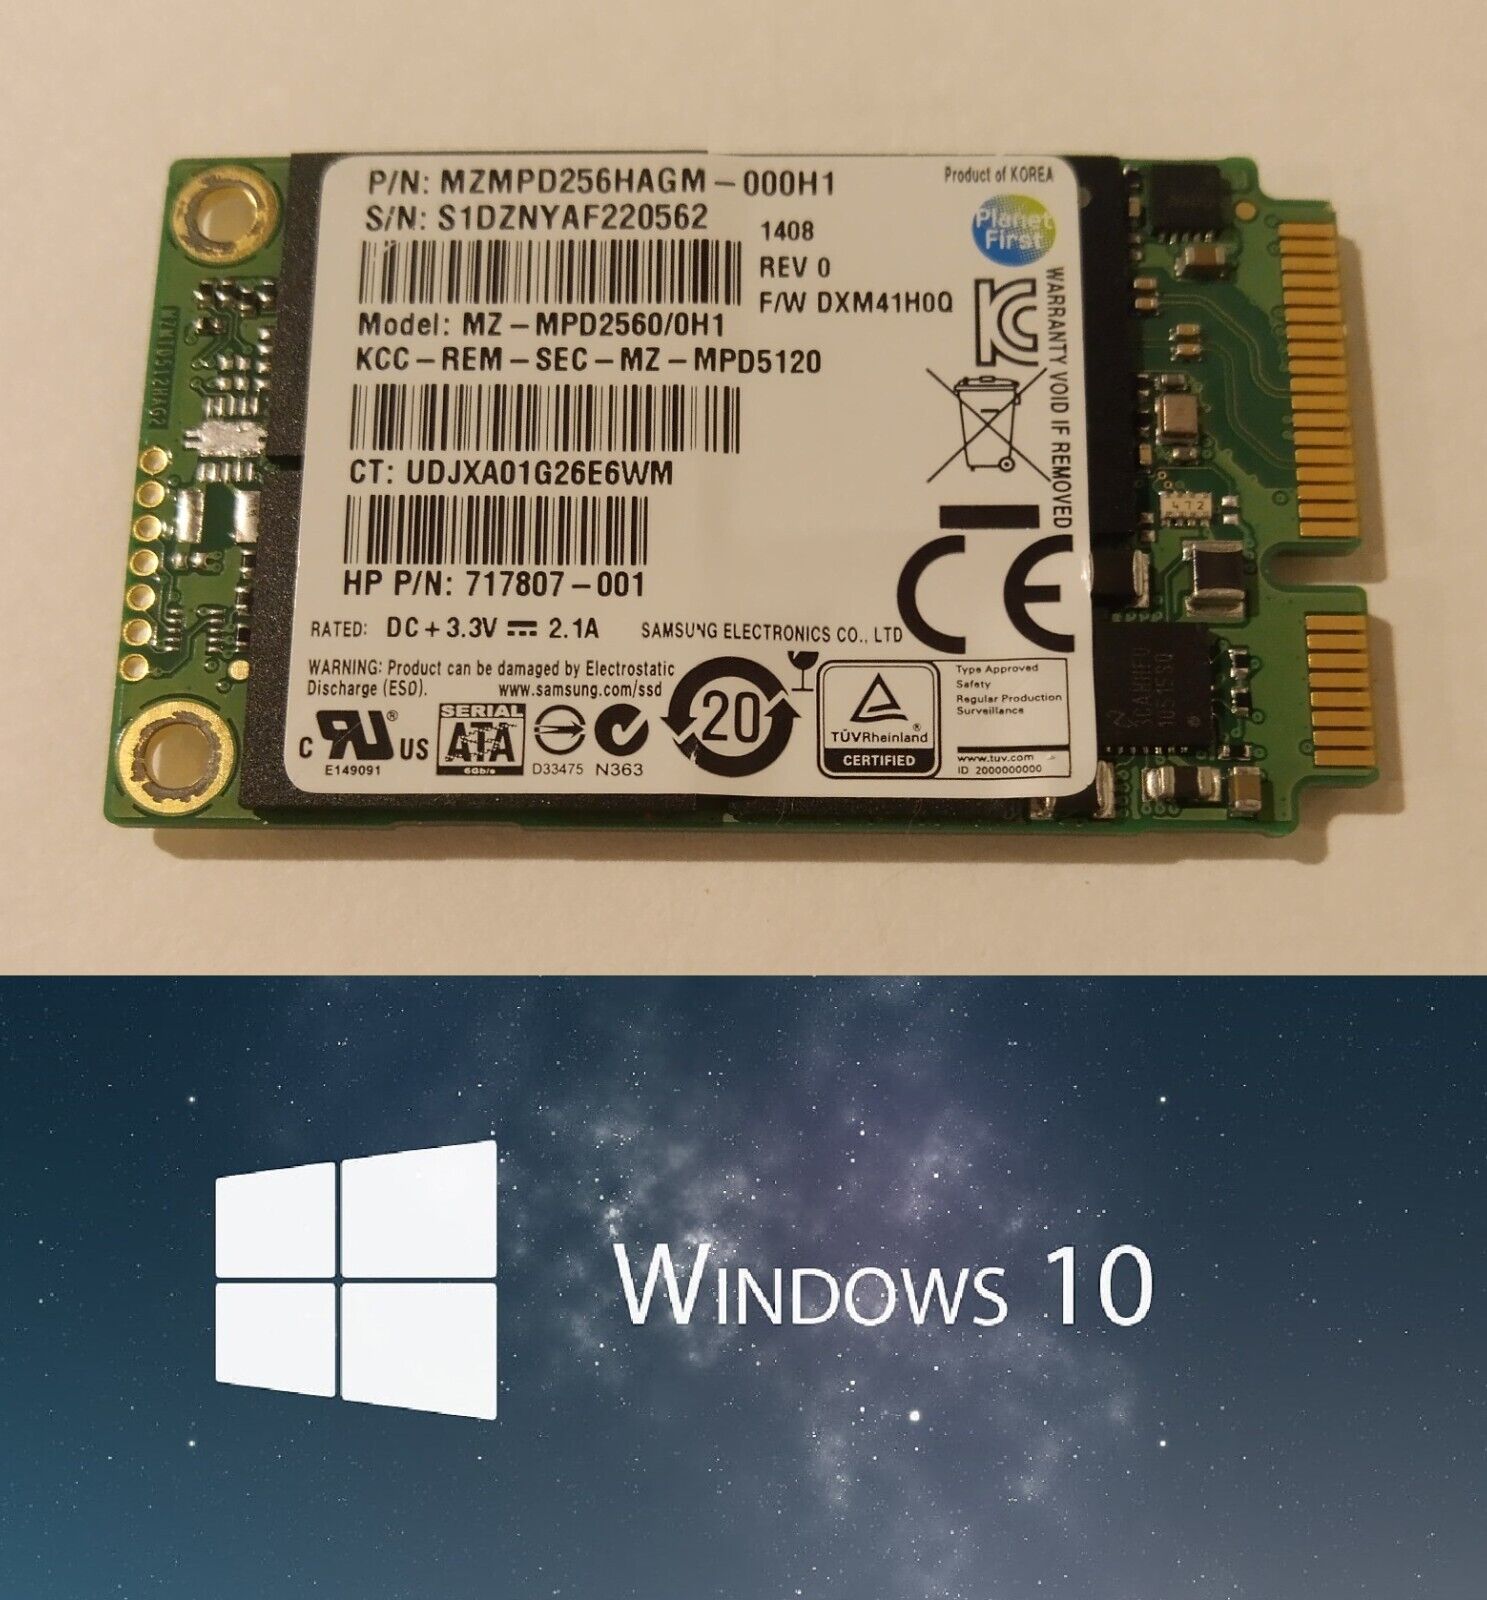 256GB mSATA SSD Solid State Drive with Windows 10 Pro UEFI [ACTIVATED]